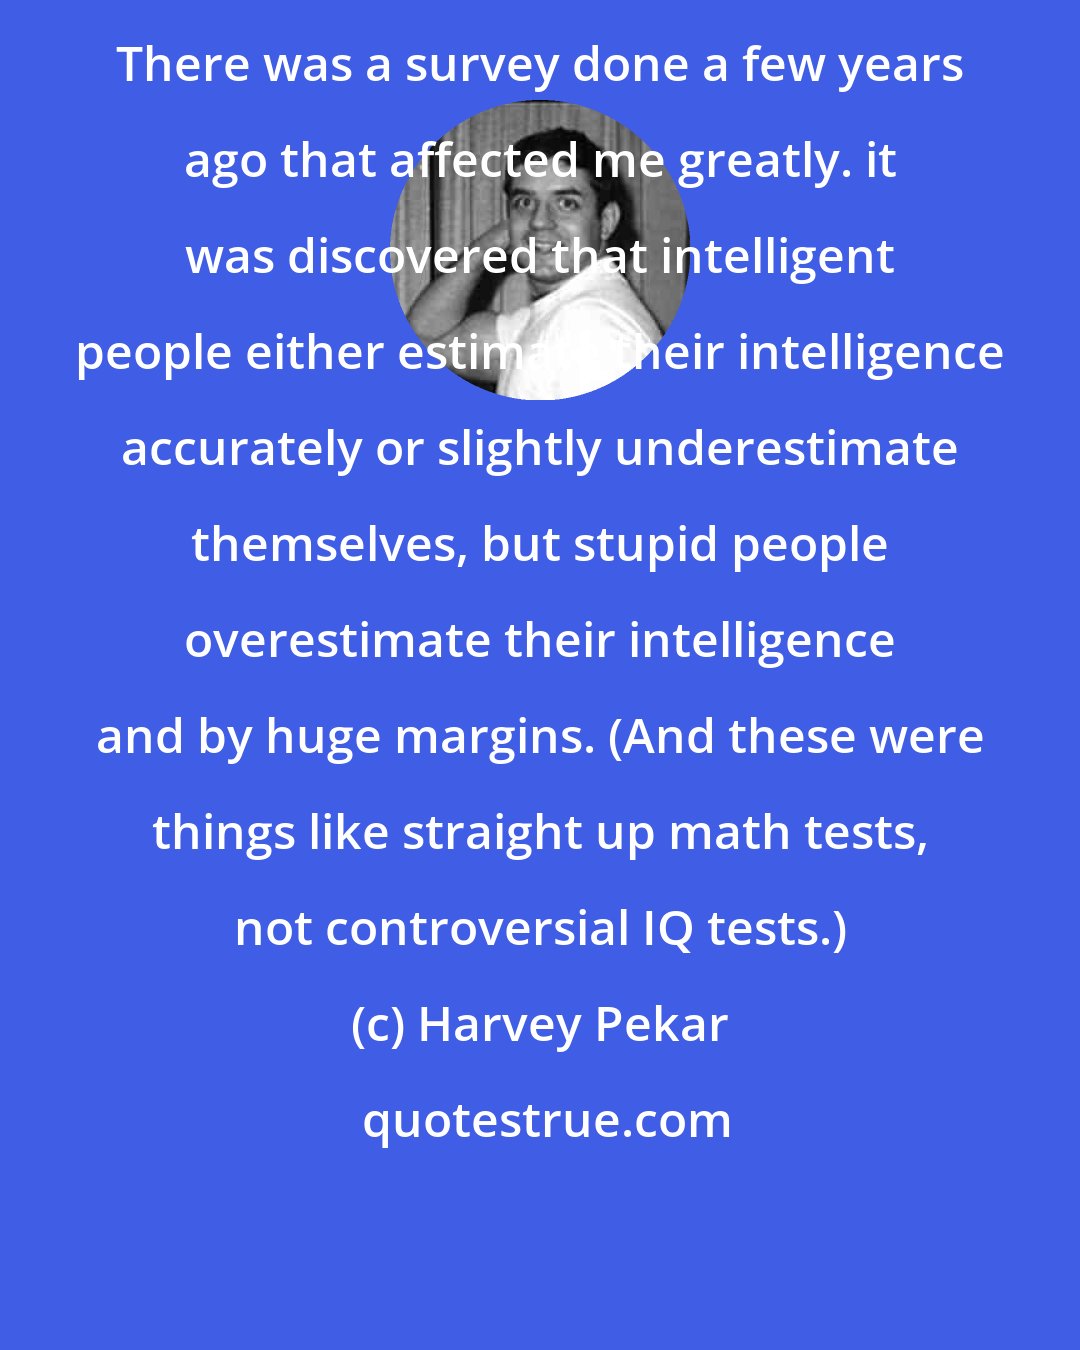 Harvey Pekar: There was a survey done a few years ago that affected me greatly. it was discovered that intelligent people either estimate their intelligence accurately or slightly underestimate themselves, but stupid people overestimate their intelligence and by huge margins. (And these were things like straight up math tests, not controversial IQ tests.)